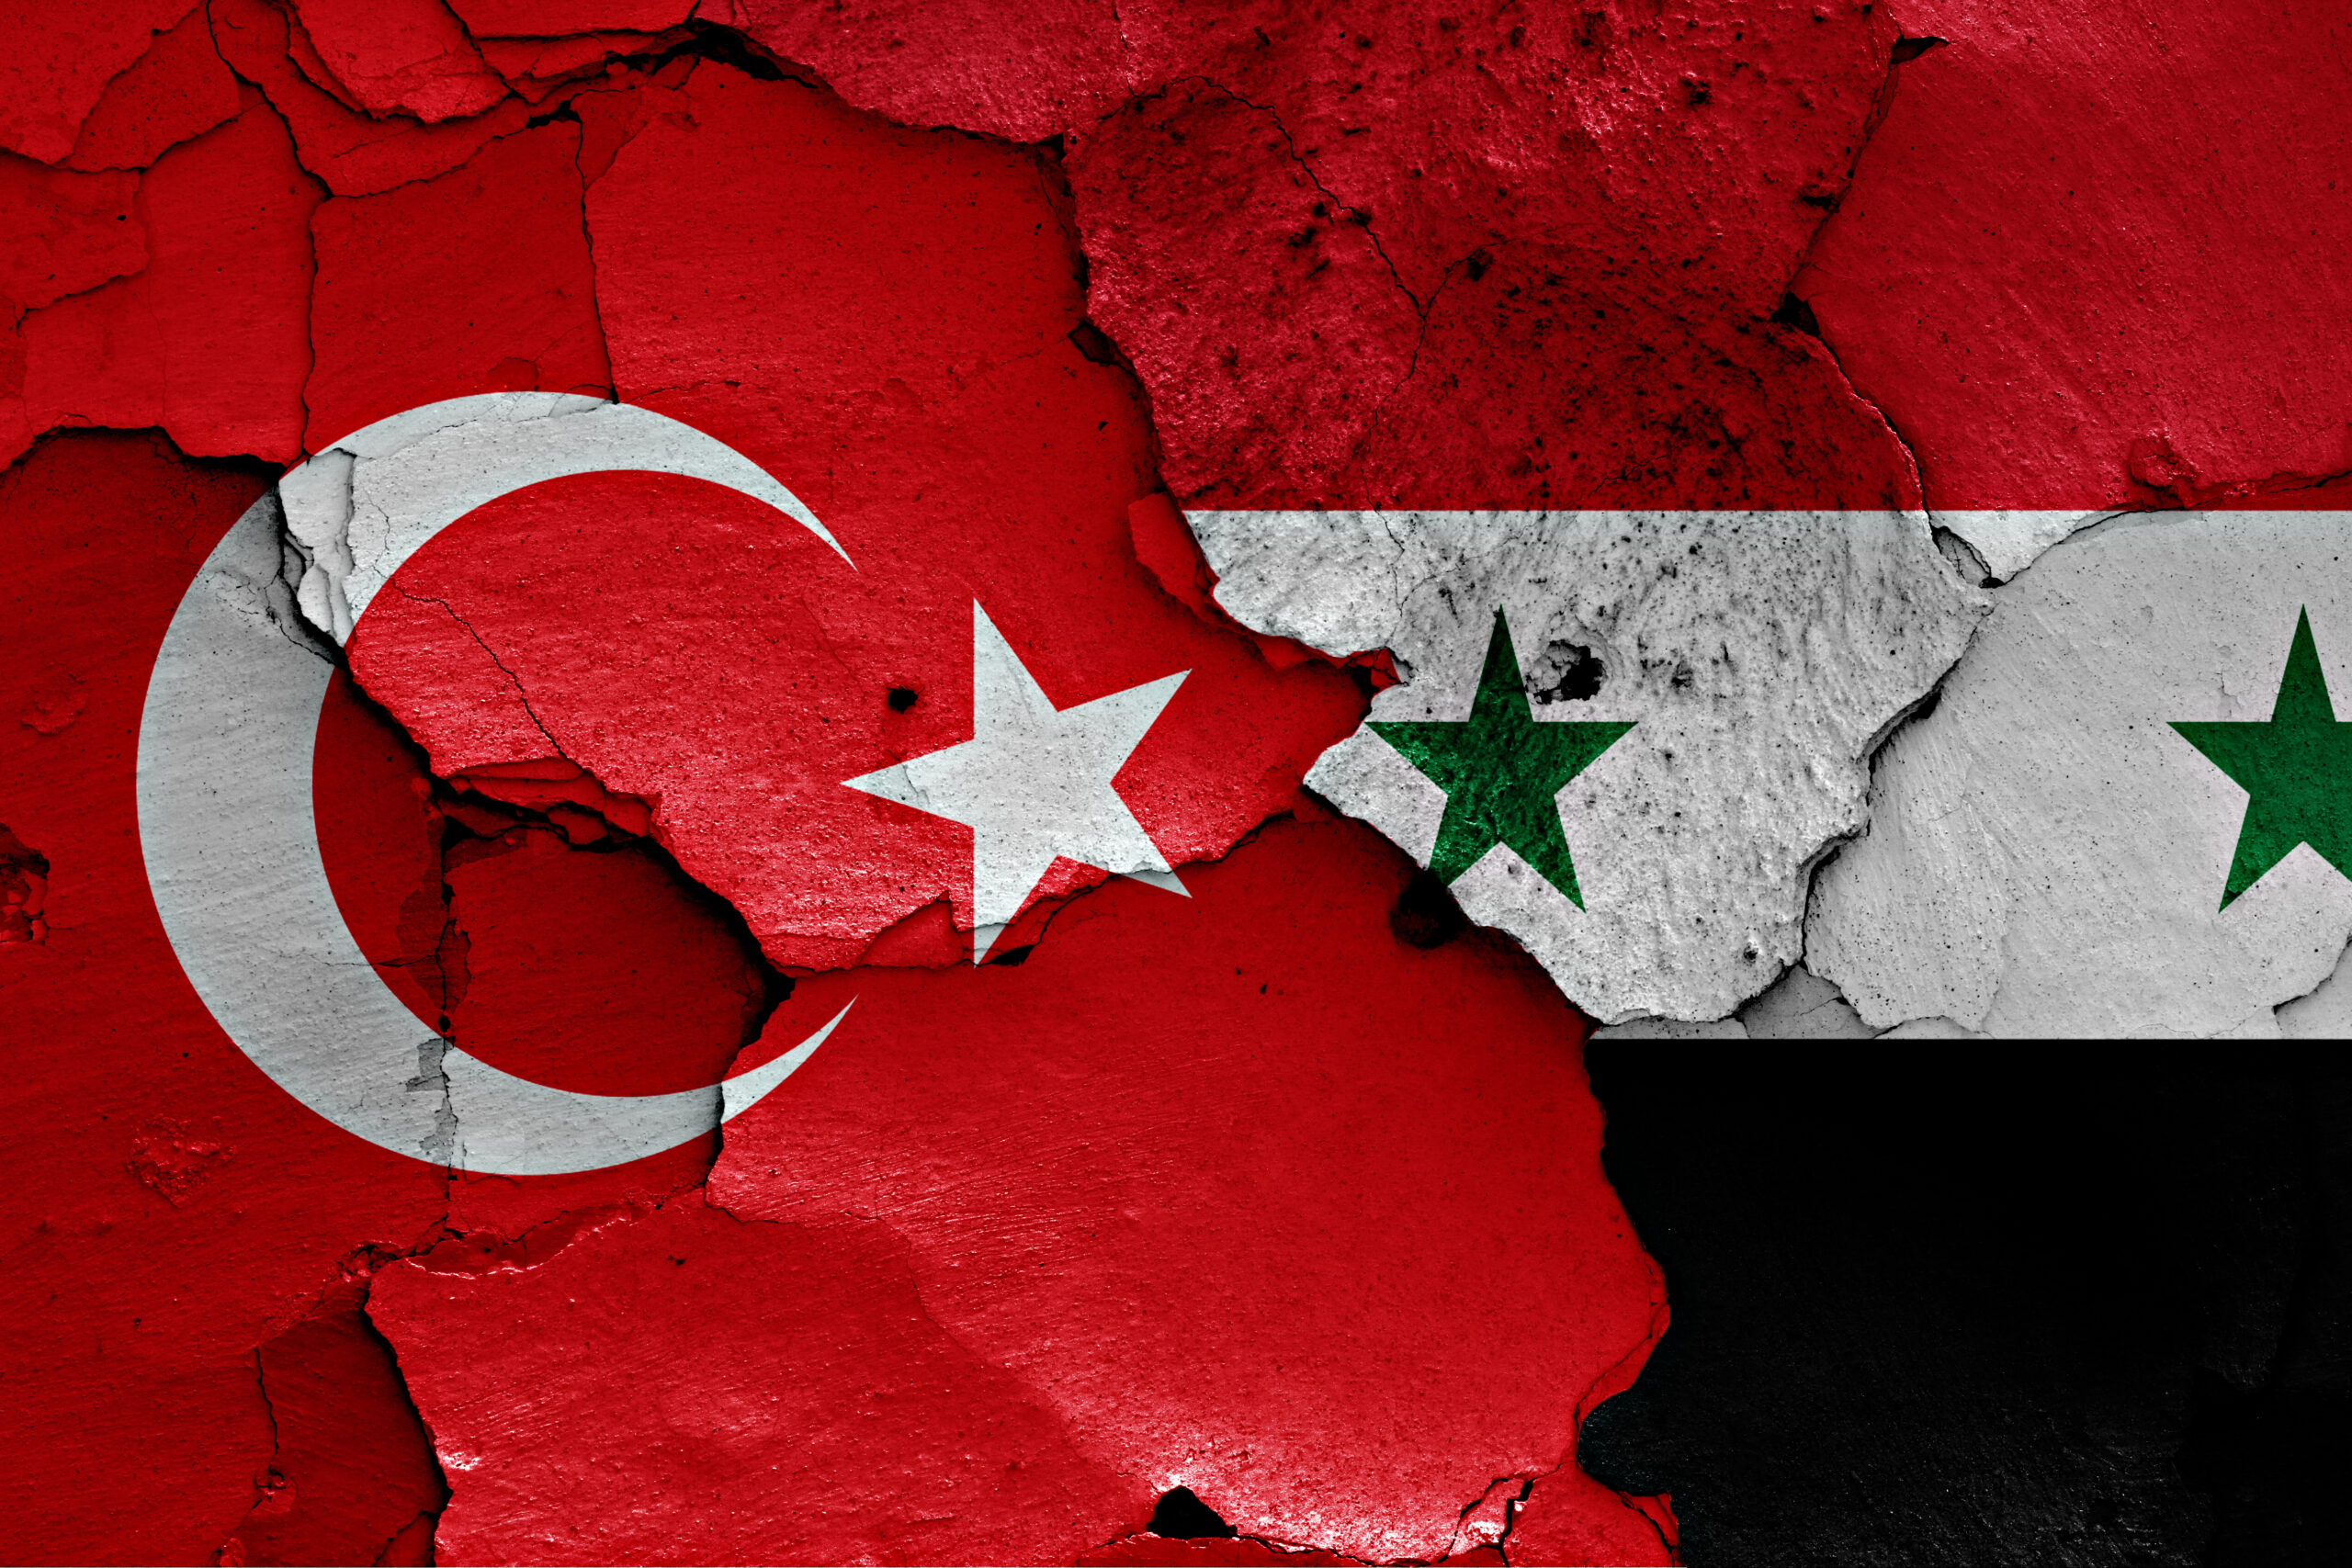 Turkey and Syria Earthquakes (Photo Credit: danielo / Shutterstock)